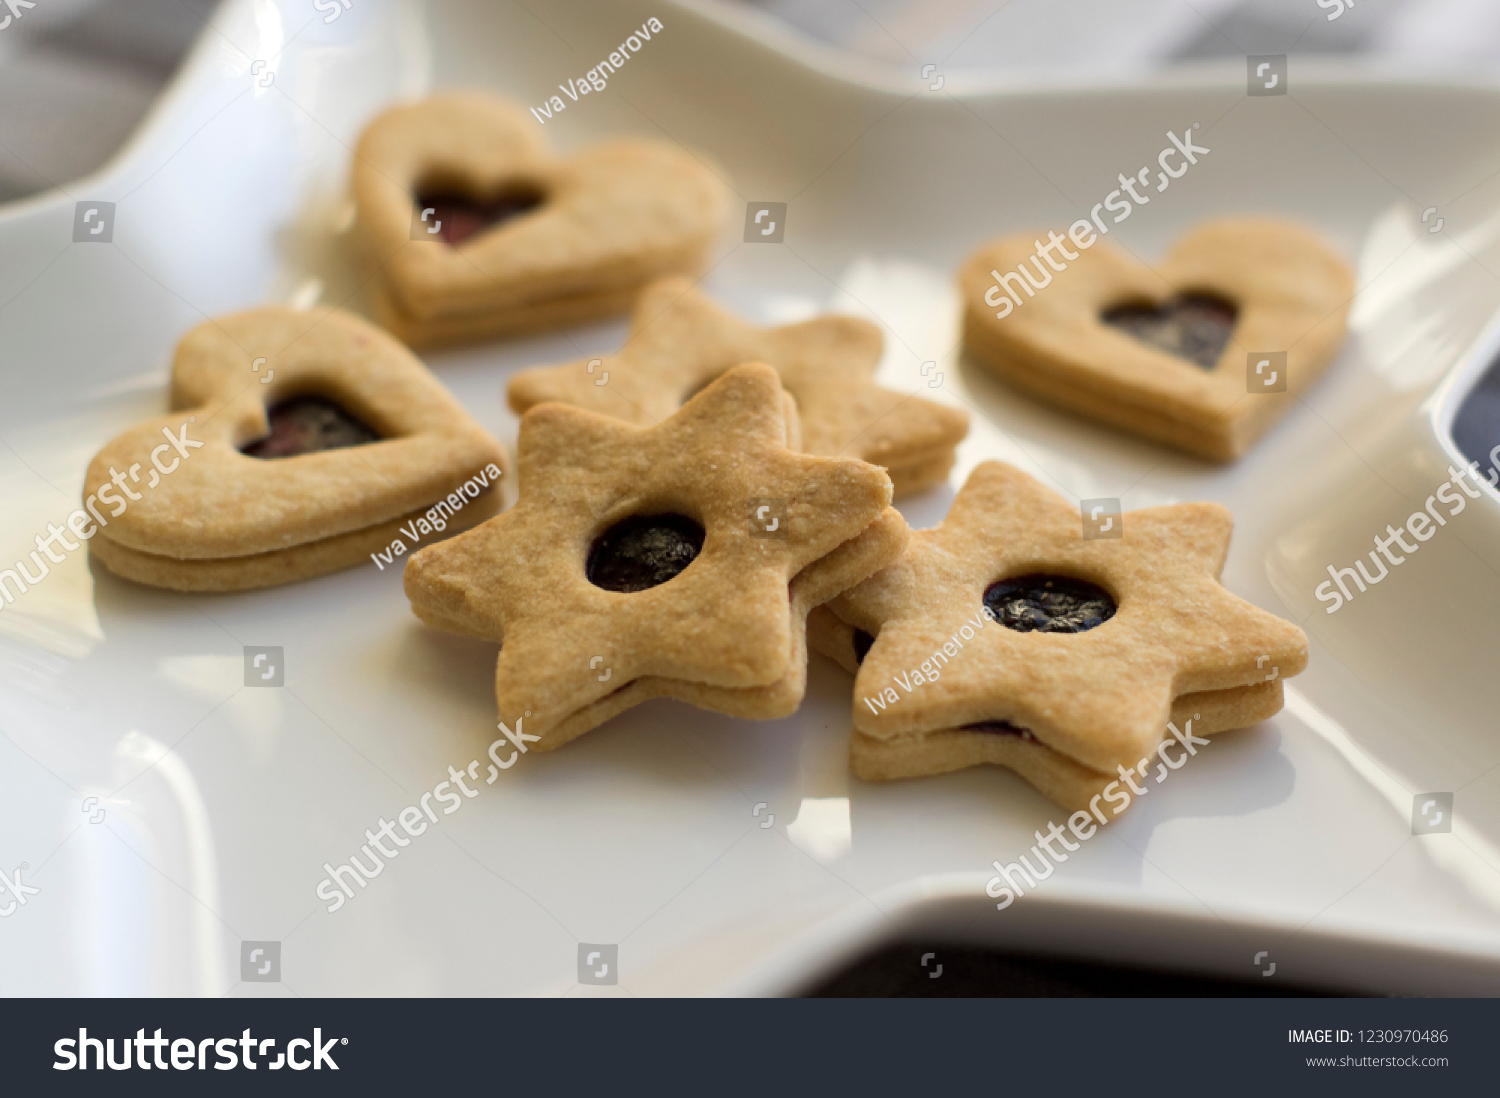 Christmas sweets and cookies made from shortcrust pastry, various shapes filled with marmalade and decorated with chocolate, star shaped plate #1230970486